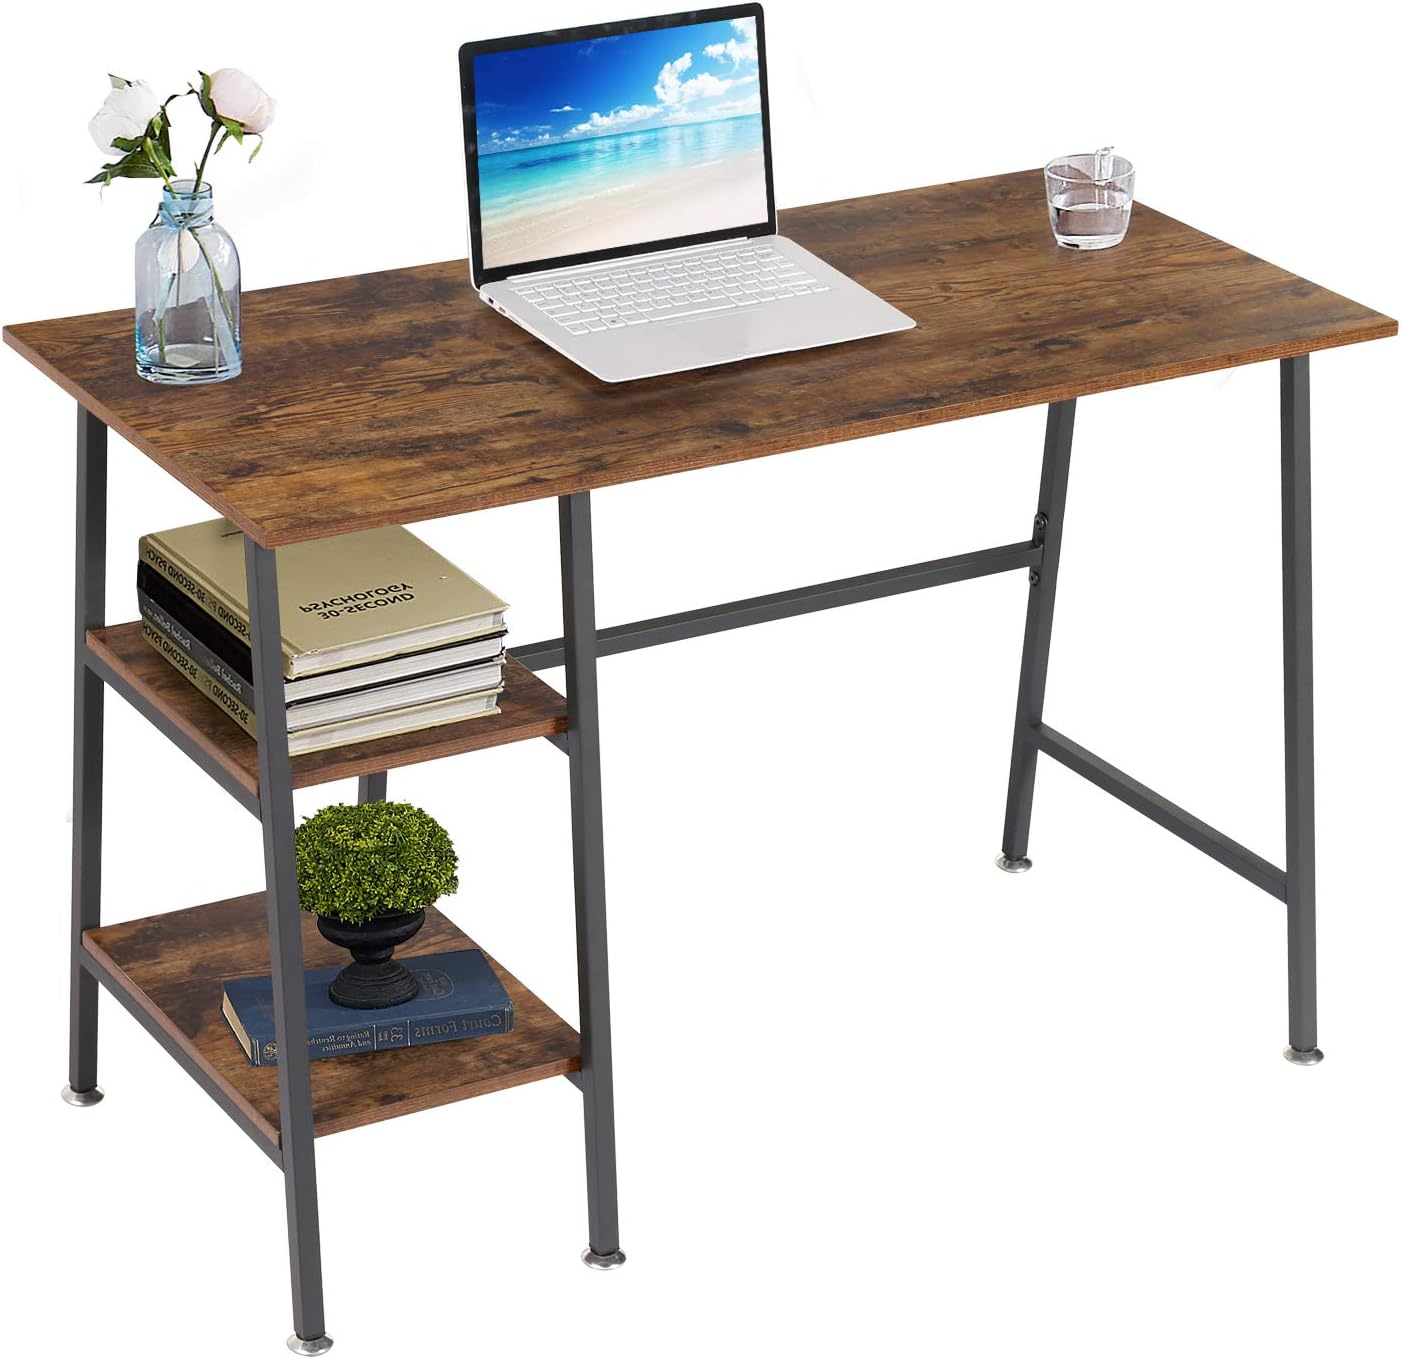 VECELO Computer Desk Study Writing Wooden Table with 2 Tier Storage Shelves on Left or Right for Home Office